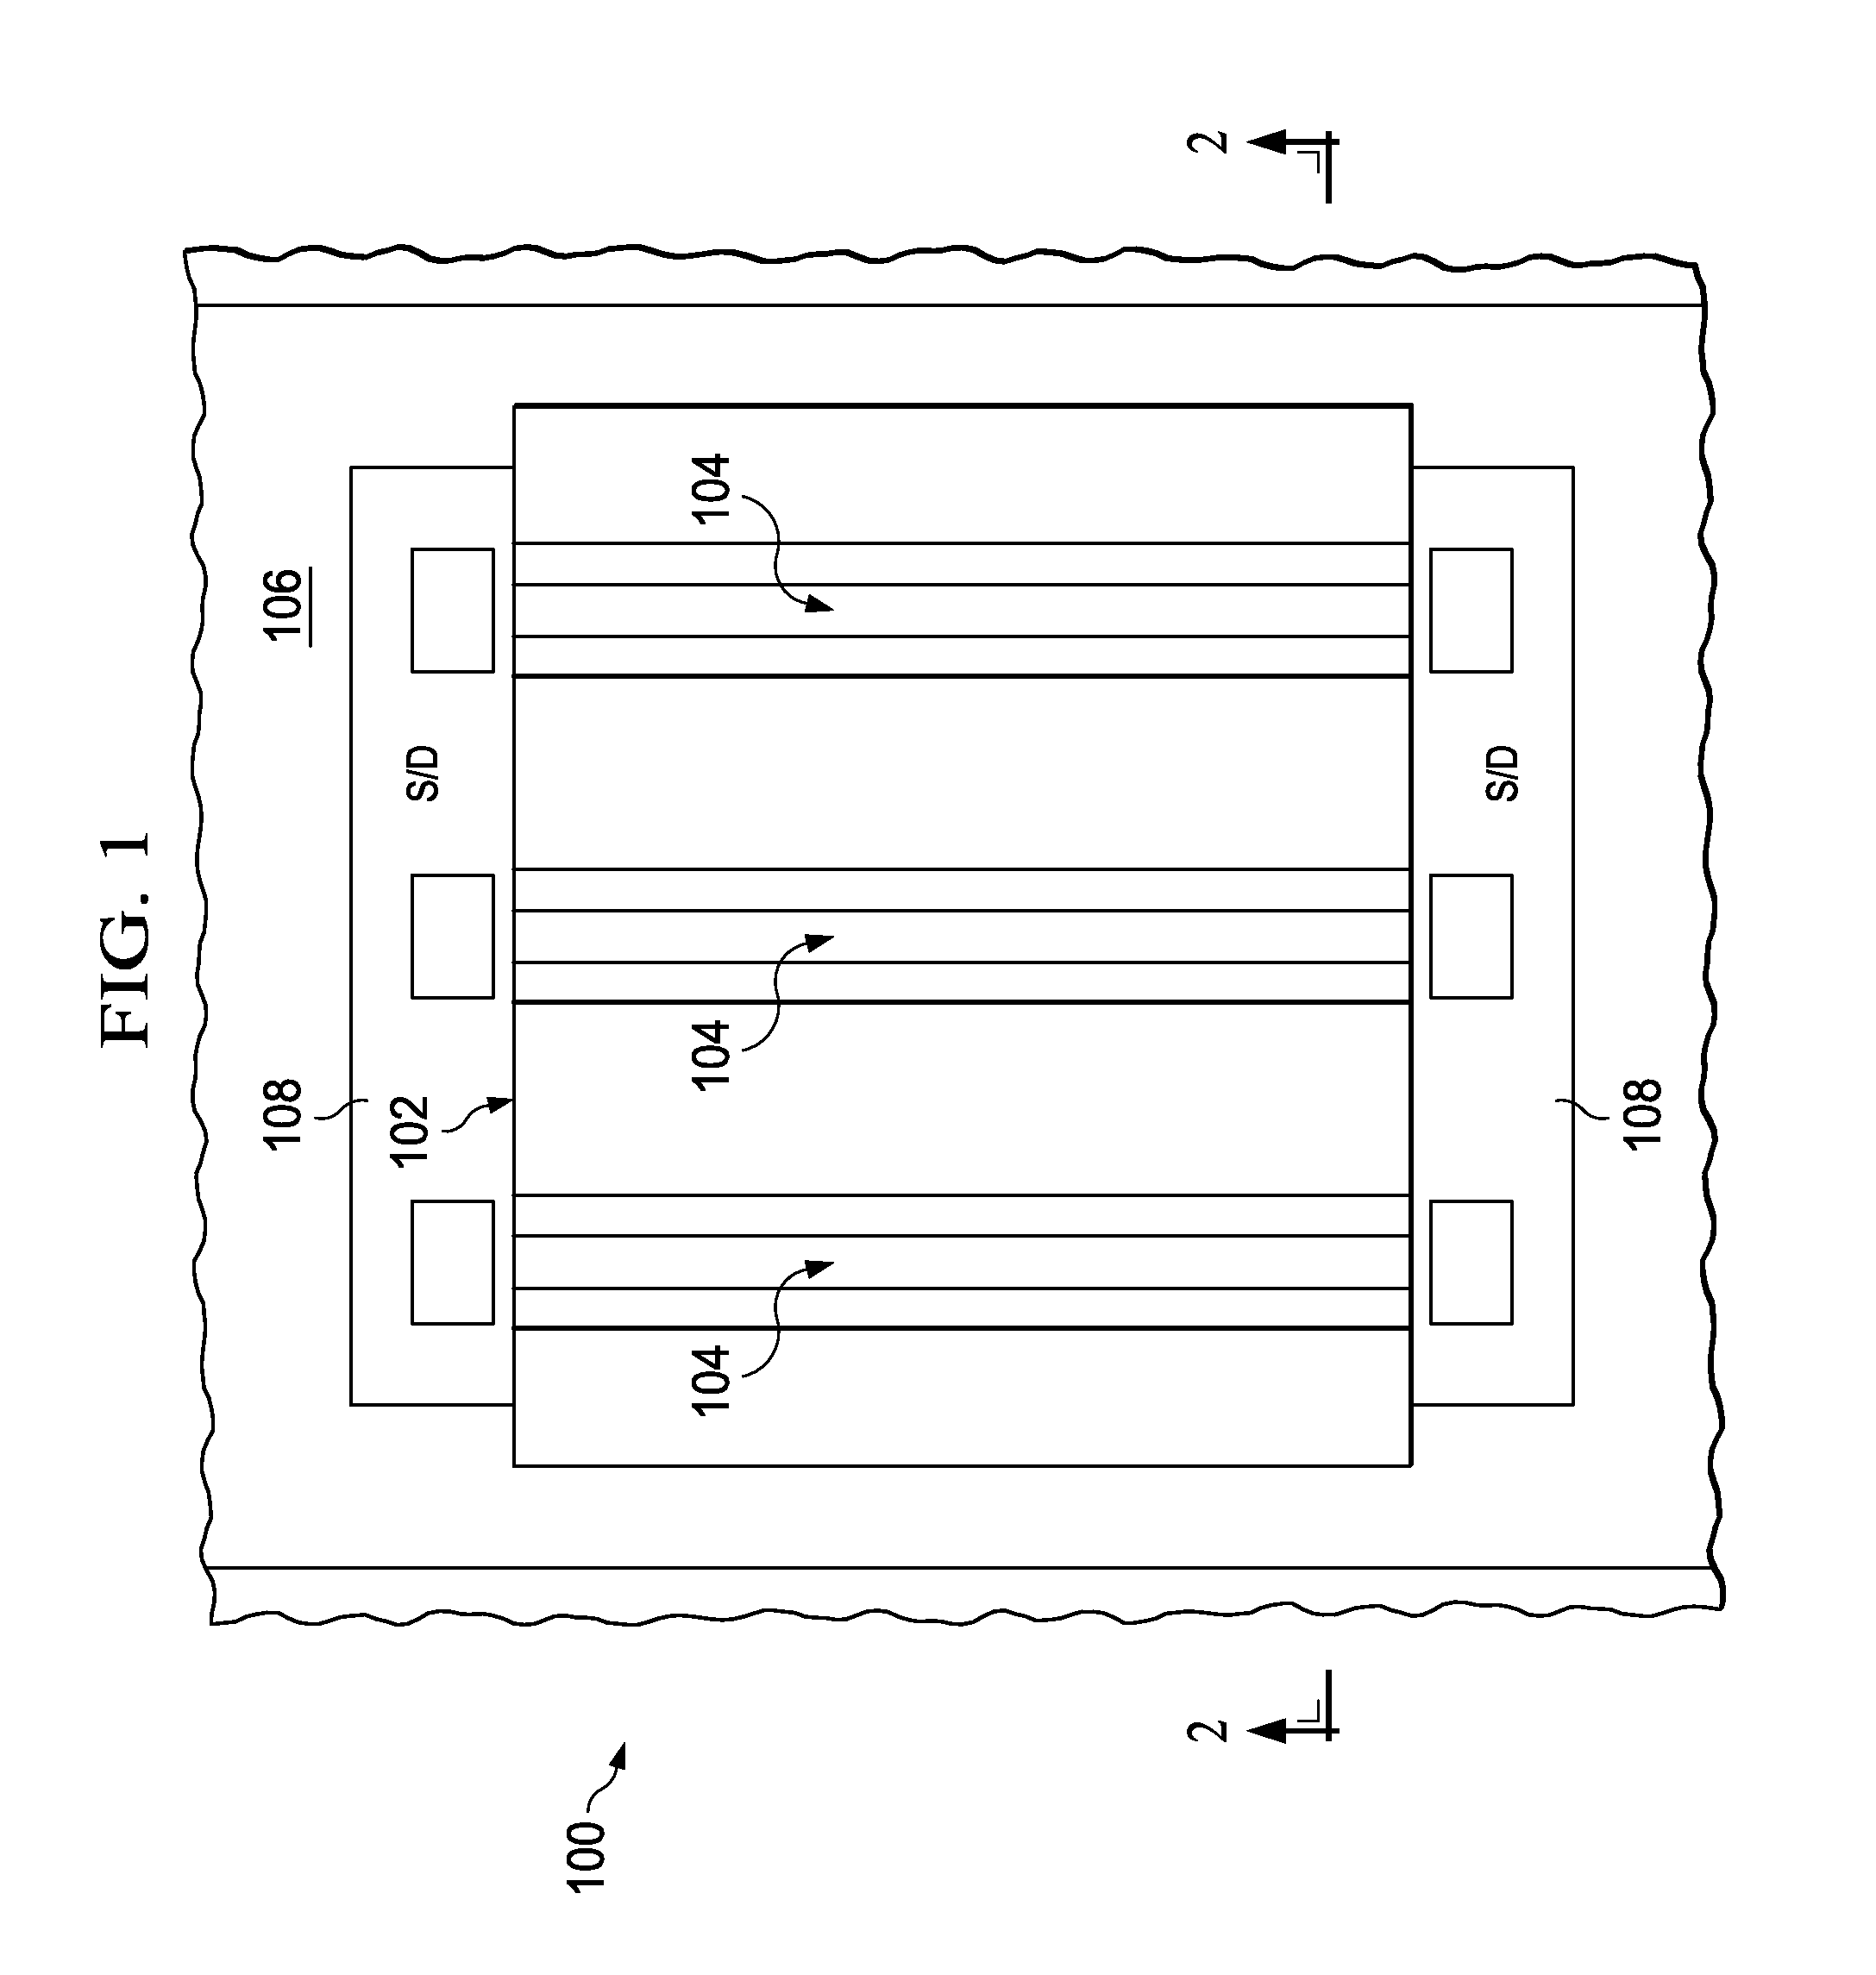 Transistors with recessed active trenches for increased effective gate width